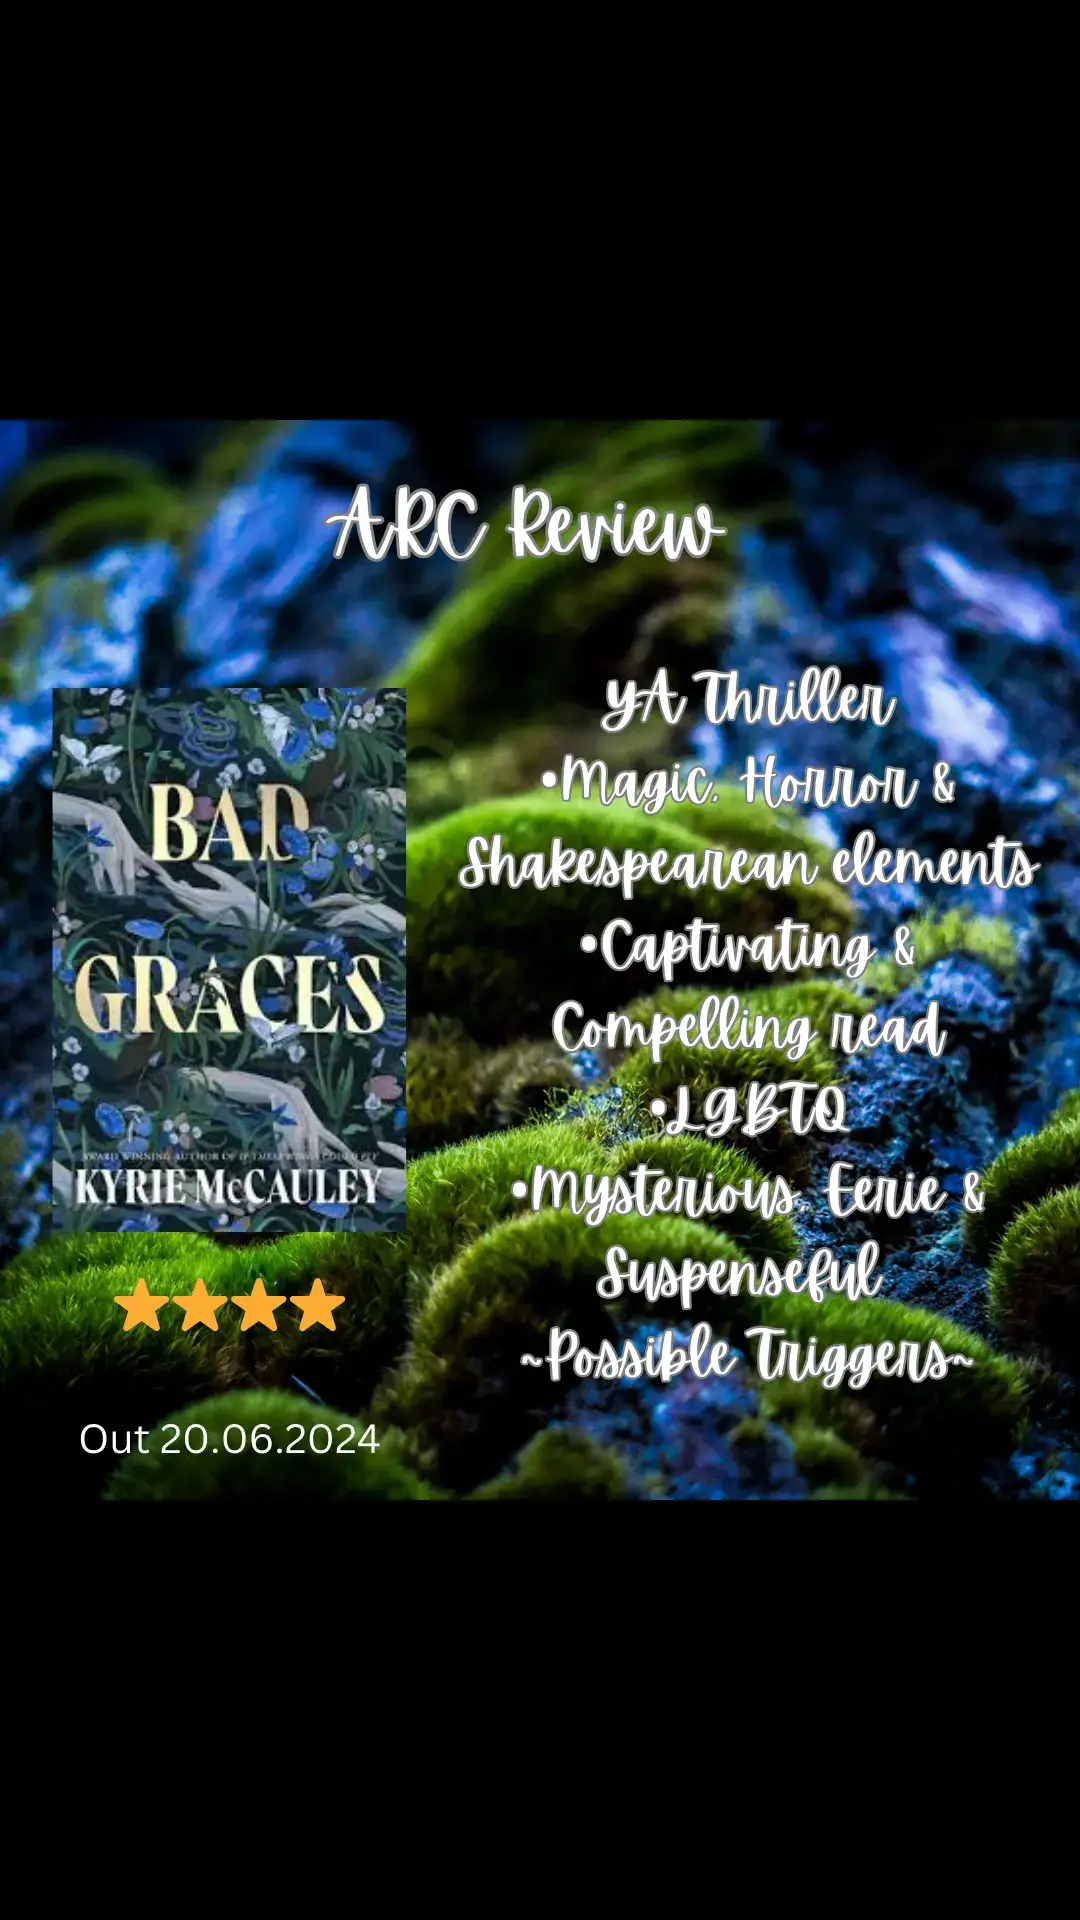 Bad Graces by Kyrie McCauley  ⭐️⭐️⭐️⭐️ Out 20.06.24 YA Thriller As with most of the books I read, I go in blind, only knowing the genre of book. So when I first started reading this story, it felt a little too young for me and like it was going to be about a group of annoying, obnoxious, rich, famous girls. I realised it has more to it than that. The more I read, the more I really felt for the group of girls. Their characters progressed and transformed throughout the story into truly likeable people. The whole book, you see it through the main female characters' eyes and experiences, Liv. She is a strong person who has had a tough life. I don't want to go into too much detail as I feel it would take something away from the story. However, the bulk of this book for me was how the group of females sll with big personalities bonded through trauma, building a solidity and solace amongst themselves in order to survive. Throughout reading Bad Graces, there is a good balance between character development, plot, and love story. I like that the latter wasn't the main focus of this book. It builds the suspense where needed and gives a sense of foreboding throughout. Kyrie McCauley describes the forest beautifully. The magical and mystical element really came alive inside my mind, I could sense what the girls were feeling around them. With the flow of this book, you could quite easily read this in one sitting. It has short chapters, which helps. It held my attention and was quite captivating in parts. This would be a perfect story for any teens wanting to venture into a book with a bit more of an adult feel. It does tackle some heavy themes and has some gory parts in it, too. All in all, I did really enjoy reading this book.it makes for an eerie, fascinating, and mysterious read. The only thing that niggled me was I felt the ending a little rushed and I wanted it to delve into the magical side a little more. A good solid read. Synopsis A group of young girls get stranded on a deserted island and try to find a way to survive. When all is not what it seems, and unusual, mysterious occurrences happen, they find themselves entwined with the island. #netgalley #harpercollinsuk #harperfiction #badgraces #kyriemccauley  #fyp #BookTok #books #reading #bookreview #bookrecommendations #yafiction #ya #yathriller #yabooks #yabookrecs #yabooktok 